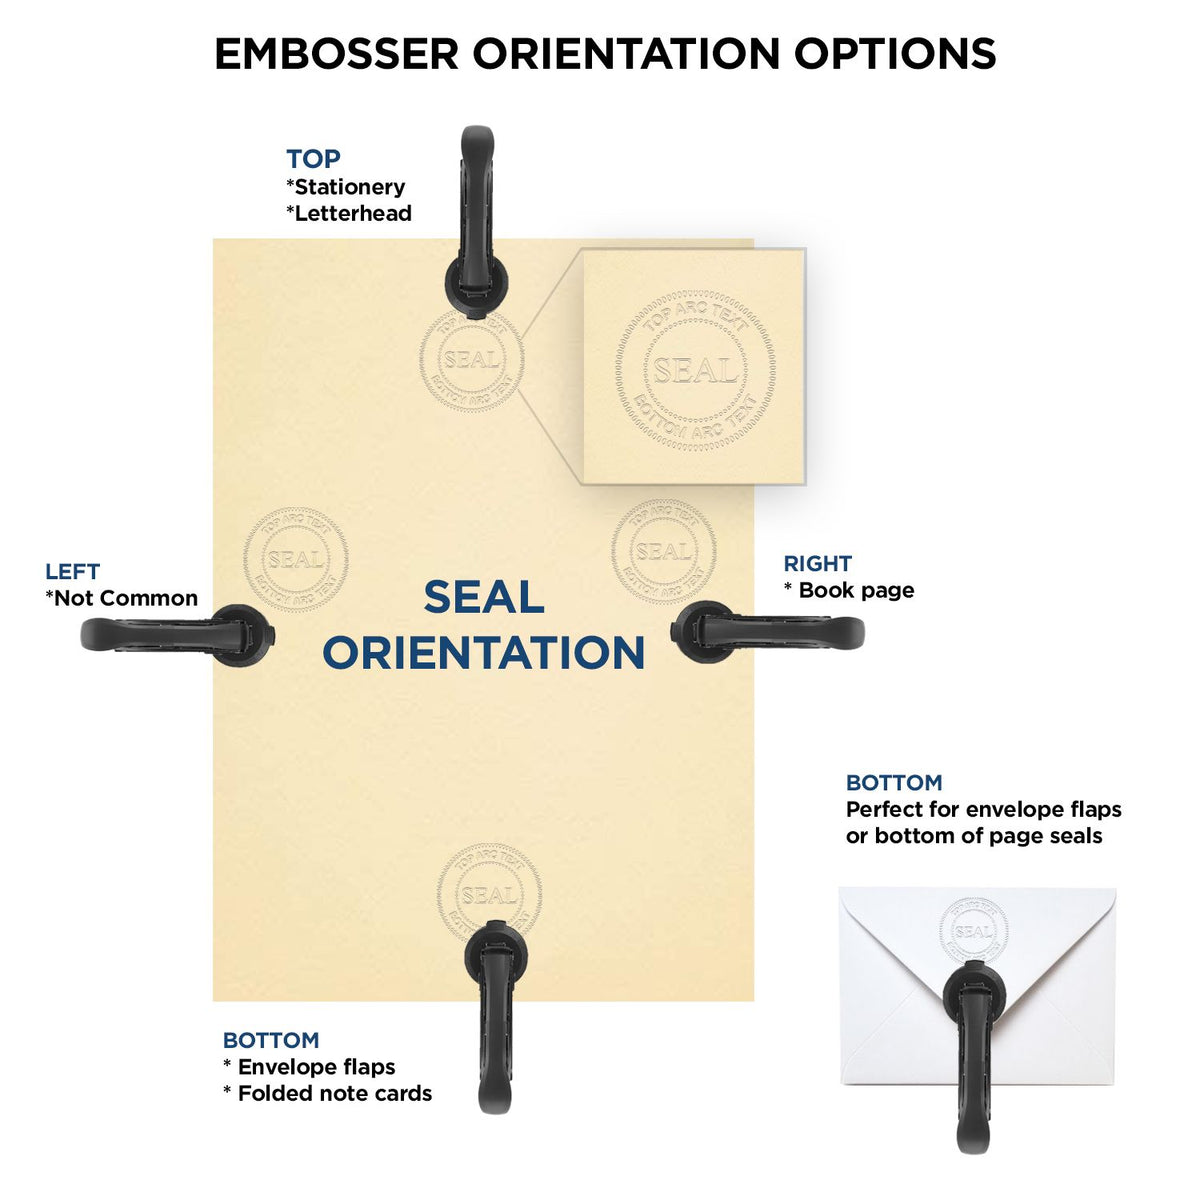 An infographic for the Heavy Duty Cast Iron North Dakota Engineer Seal Embosser showing embosser orientation, this is showing examples of a top, bottom, right and left insert.